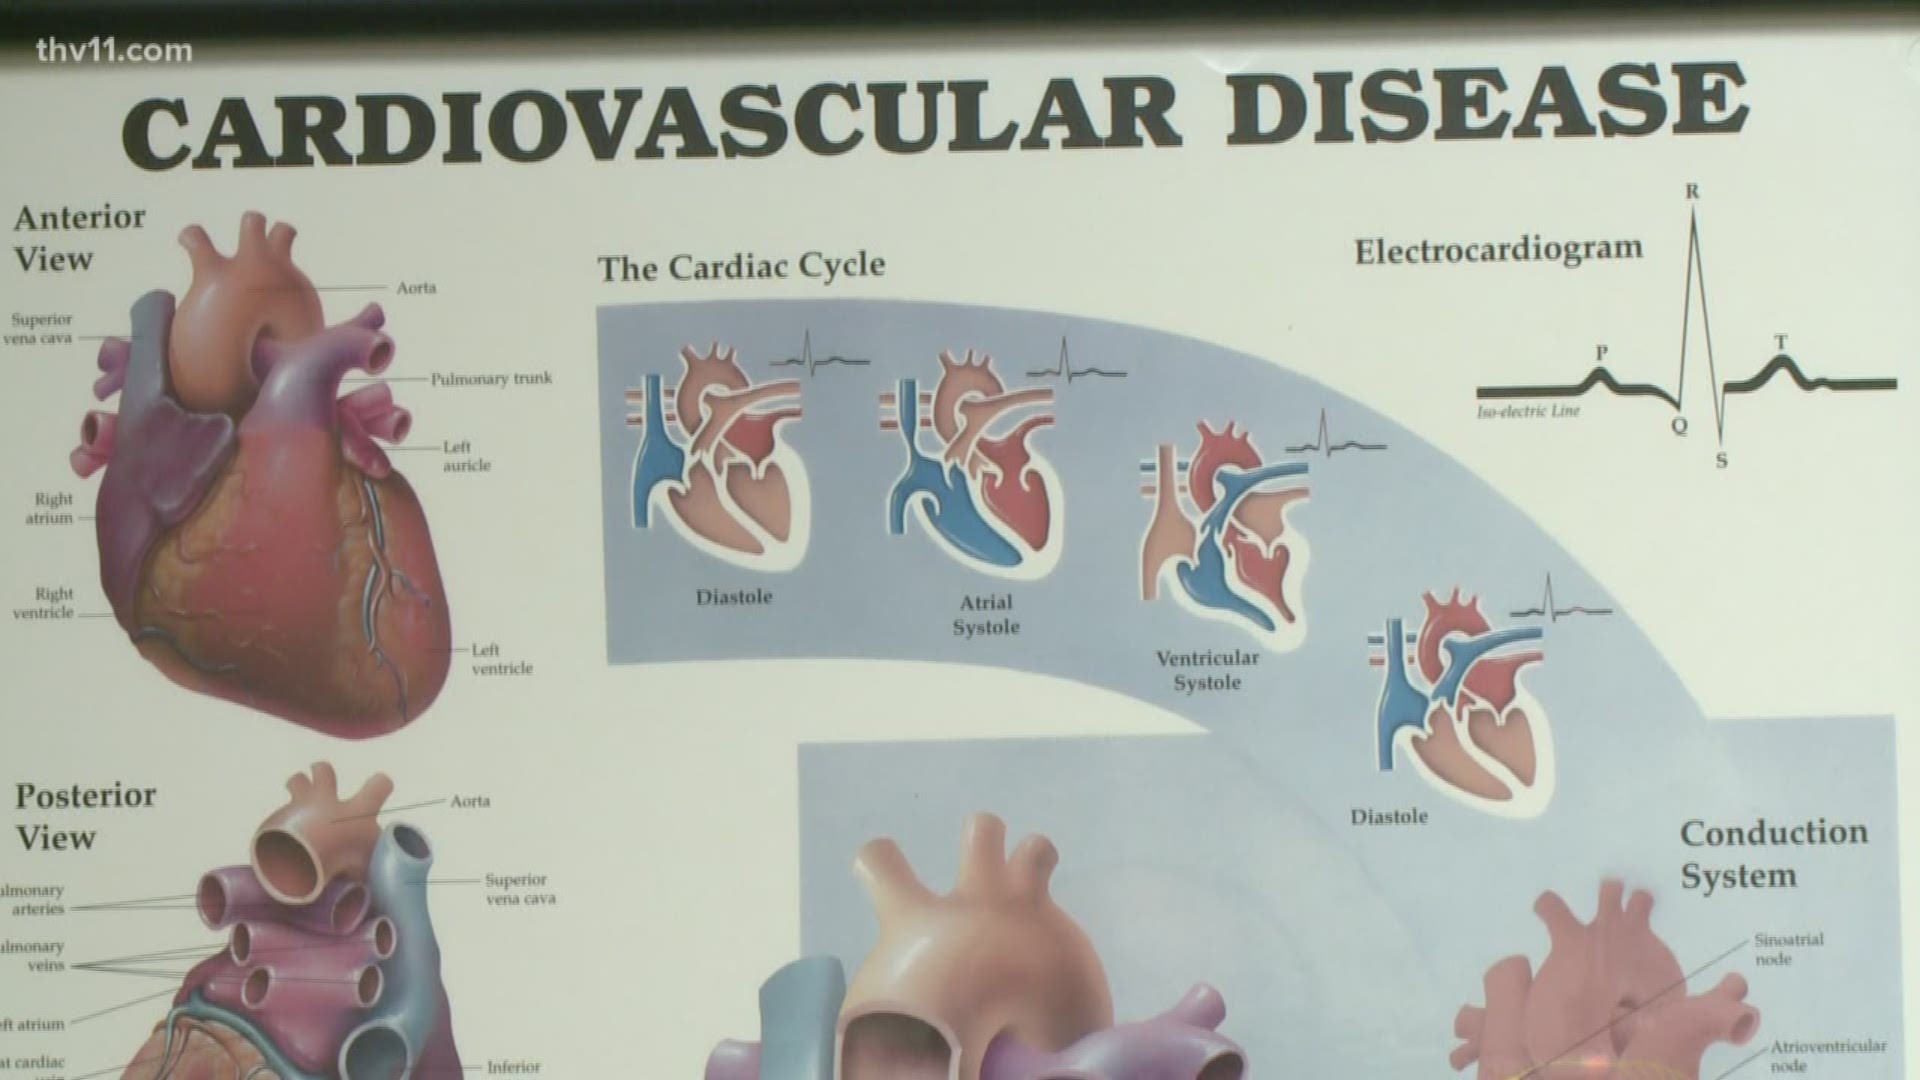 Coronary artery disease is the narrowing or blockage of the coronary arteries, usually caused by atherosclerosis.